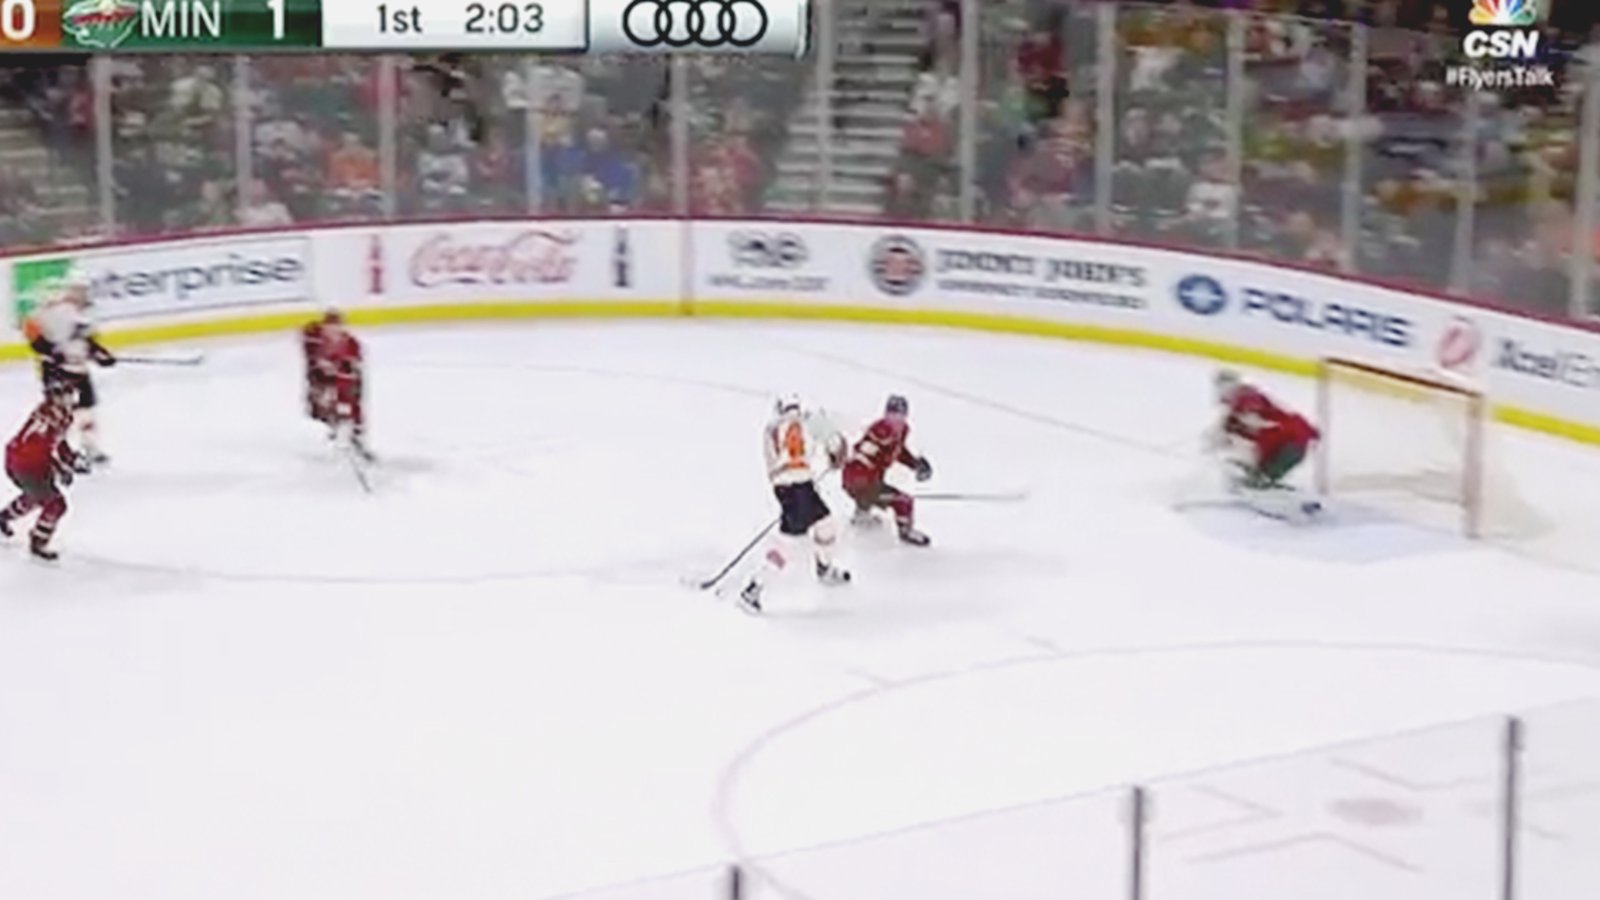 MUST SEE: Couturier’s slick goal after sweeping the puck between his legs.